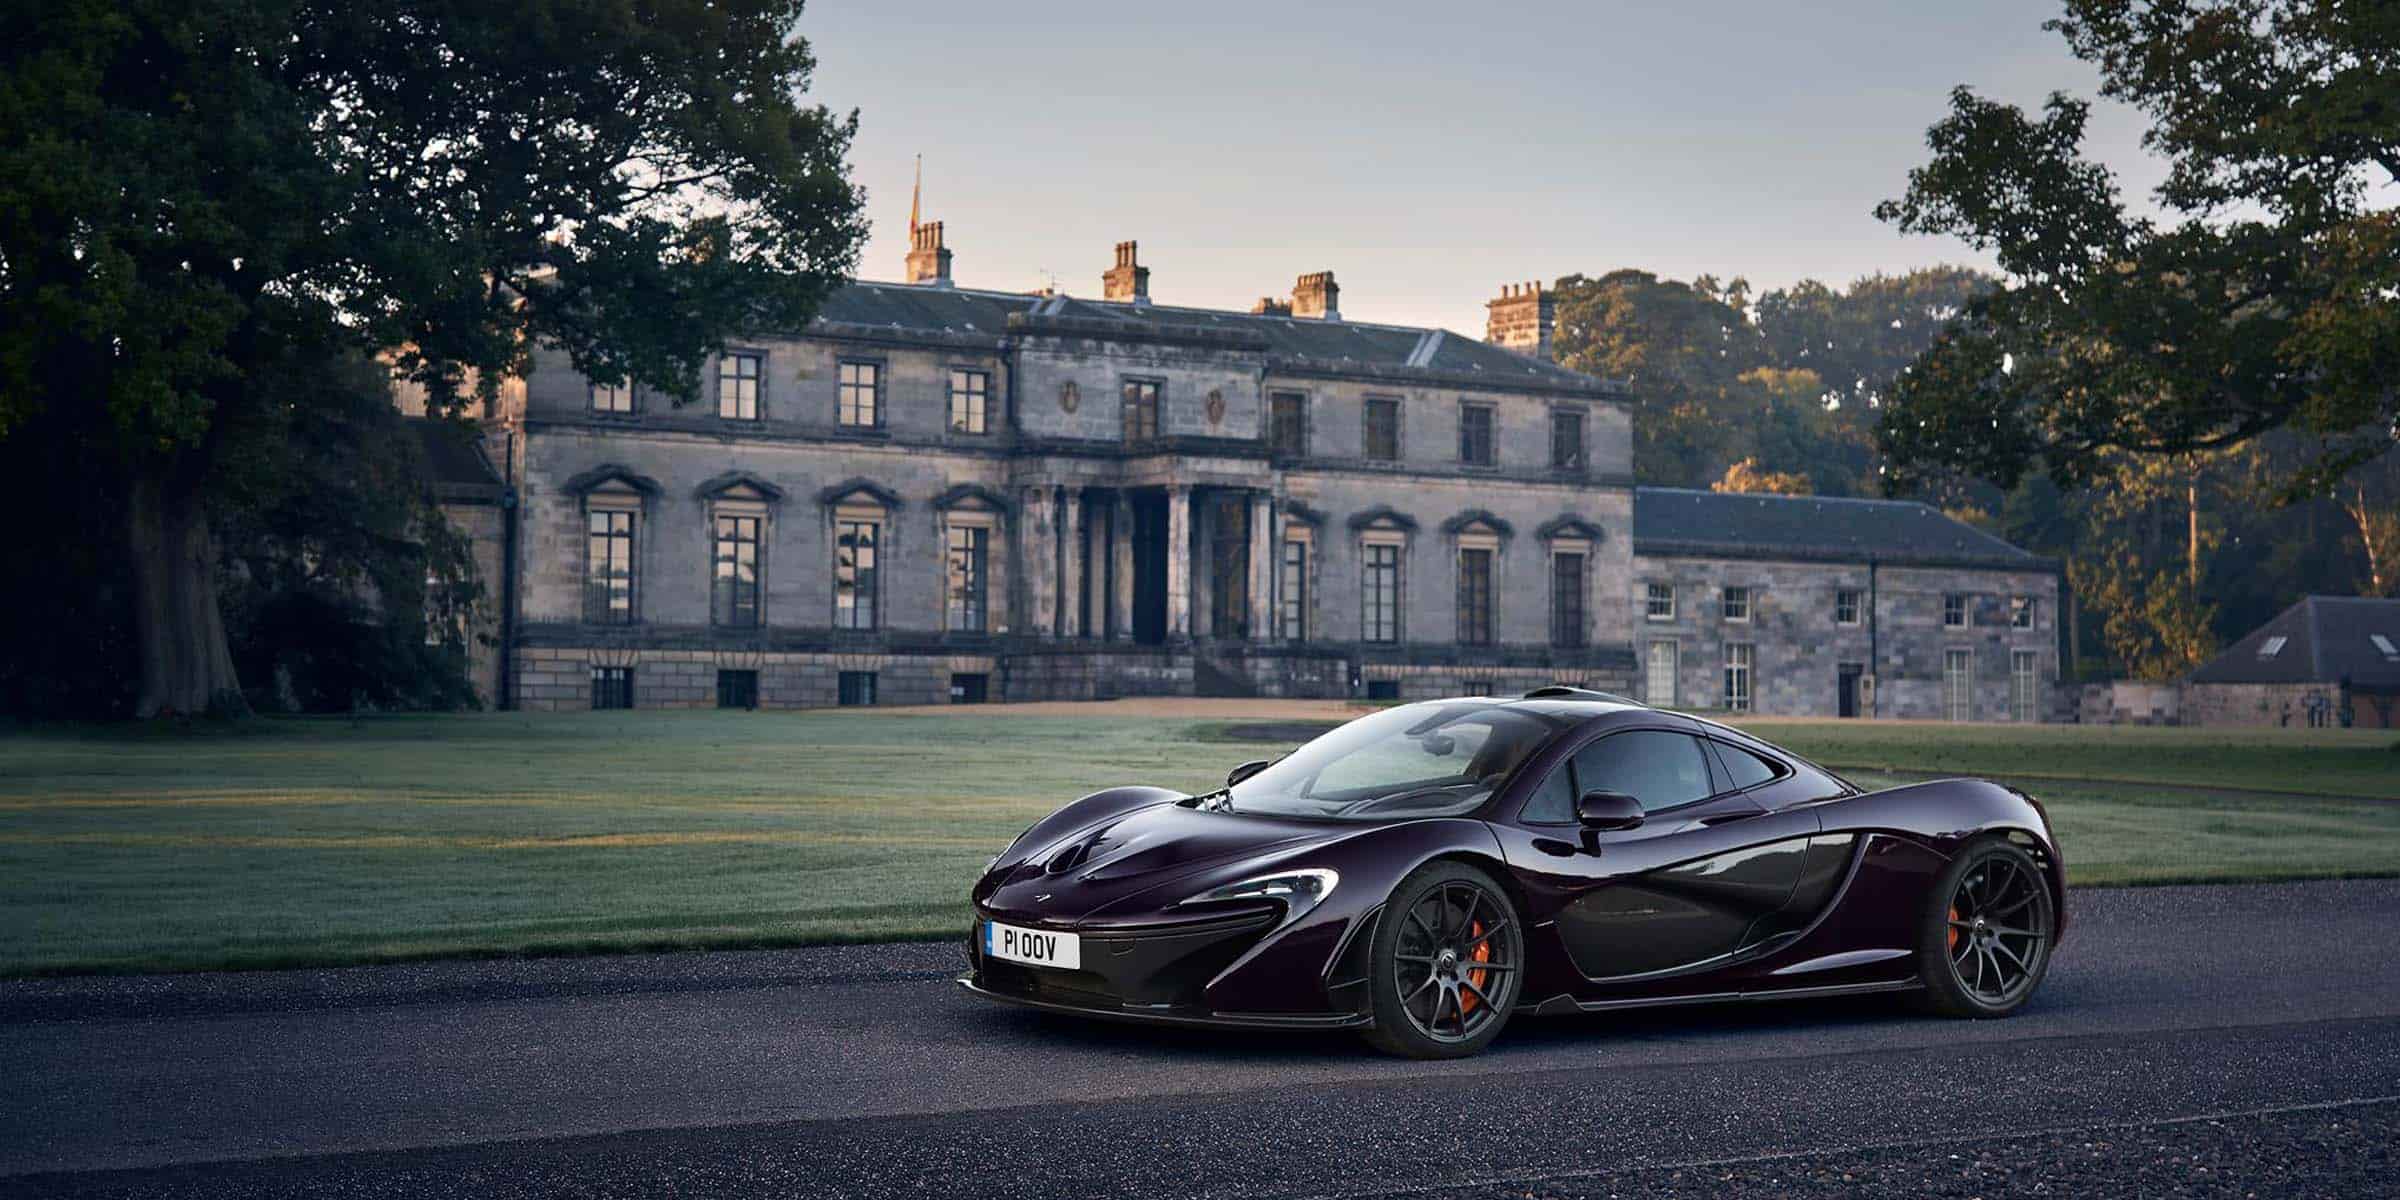 McLaren Cars and SUV List: Price, Reviews, and Specs